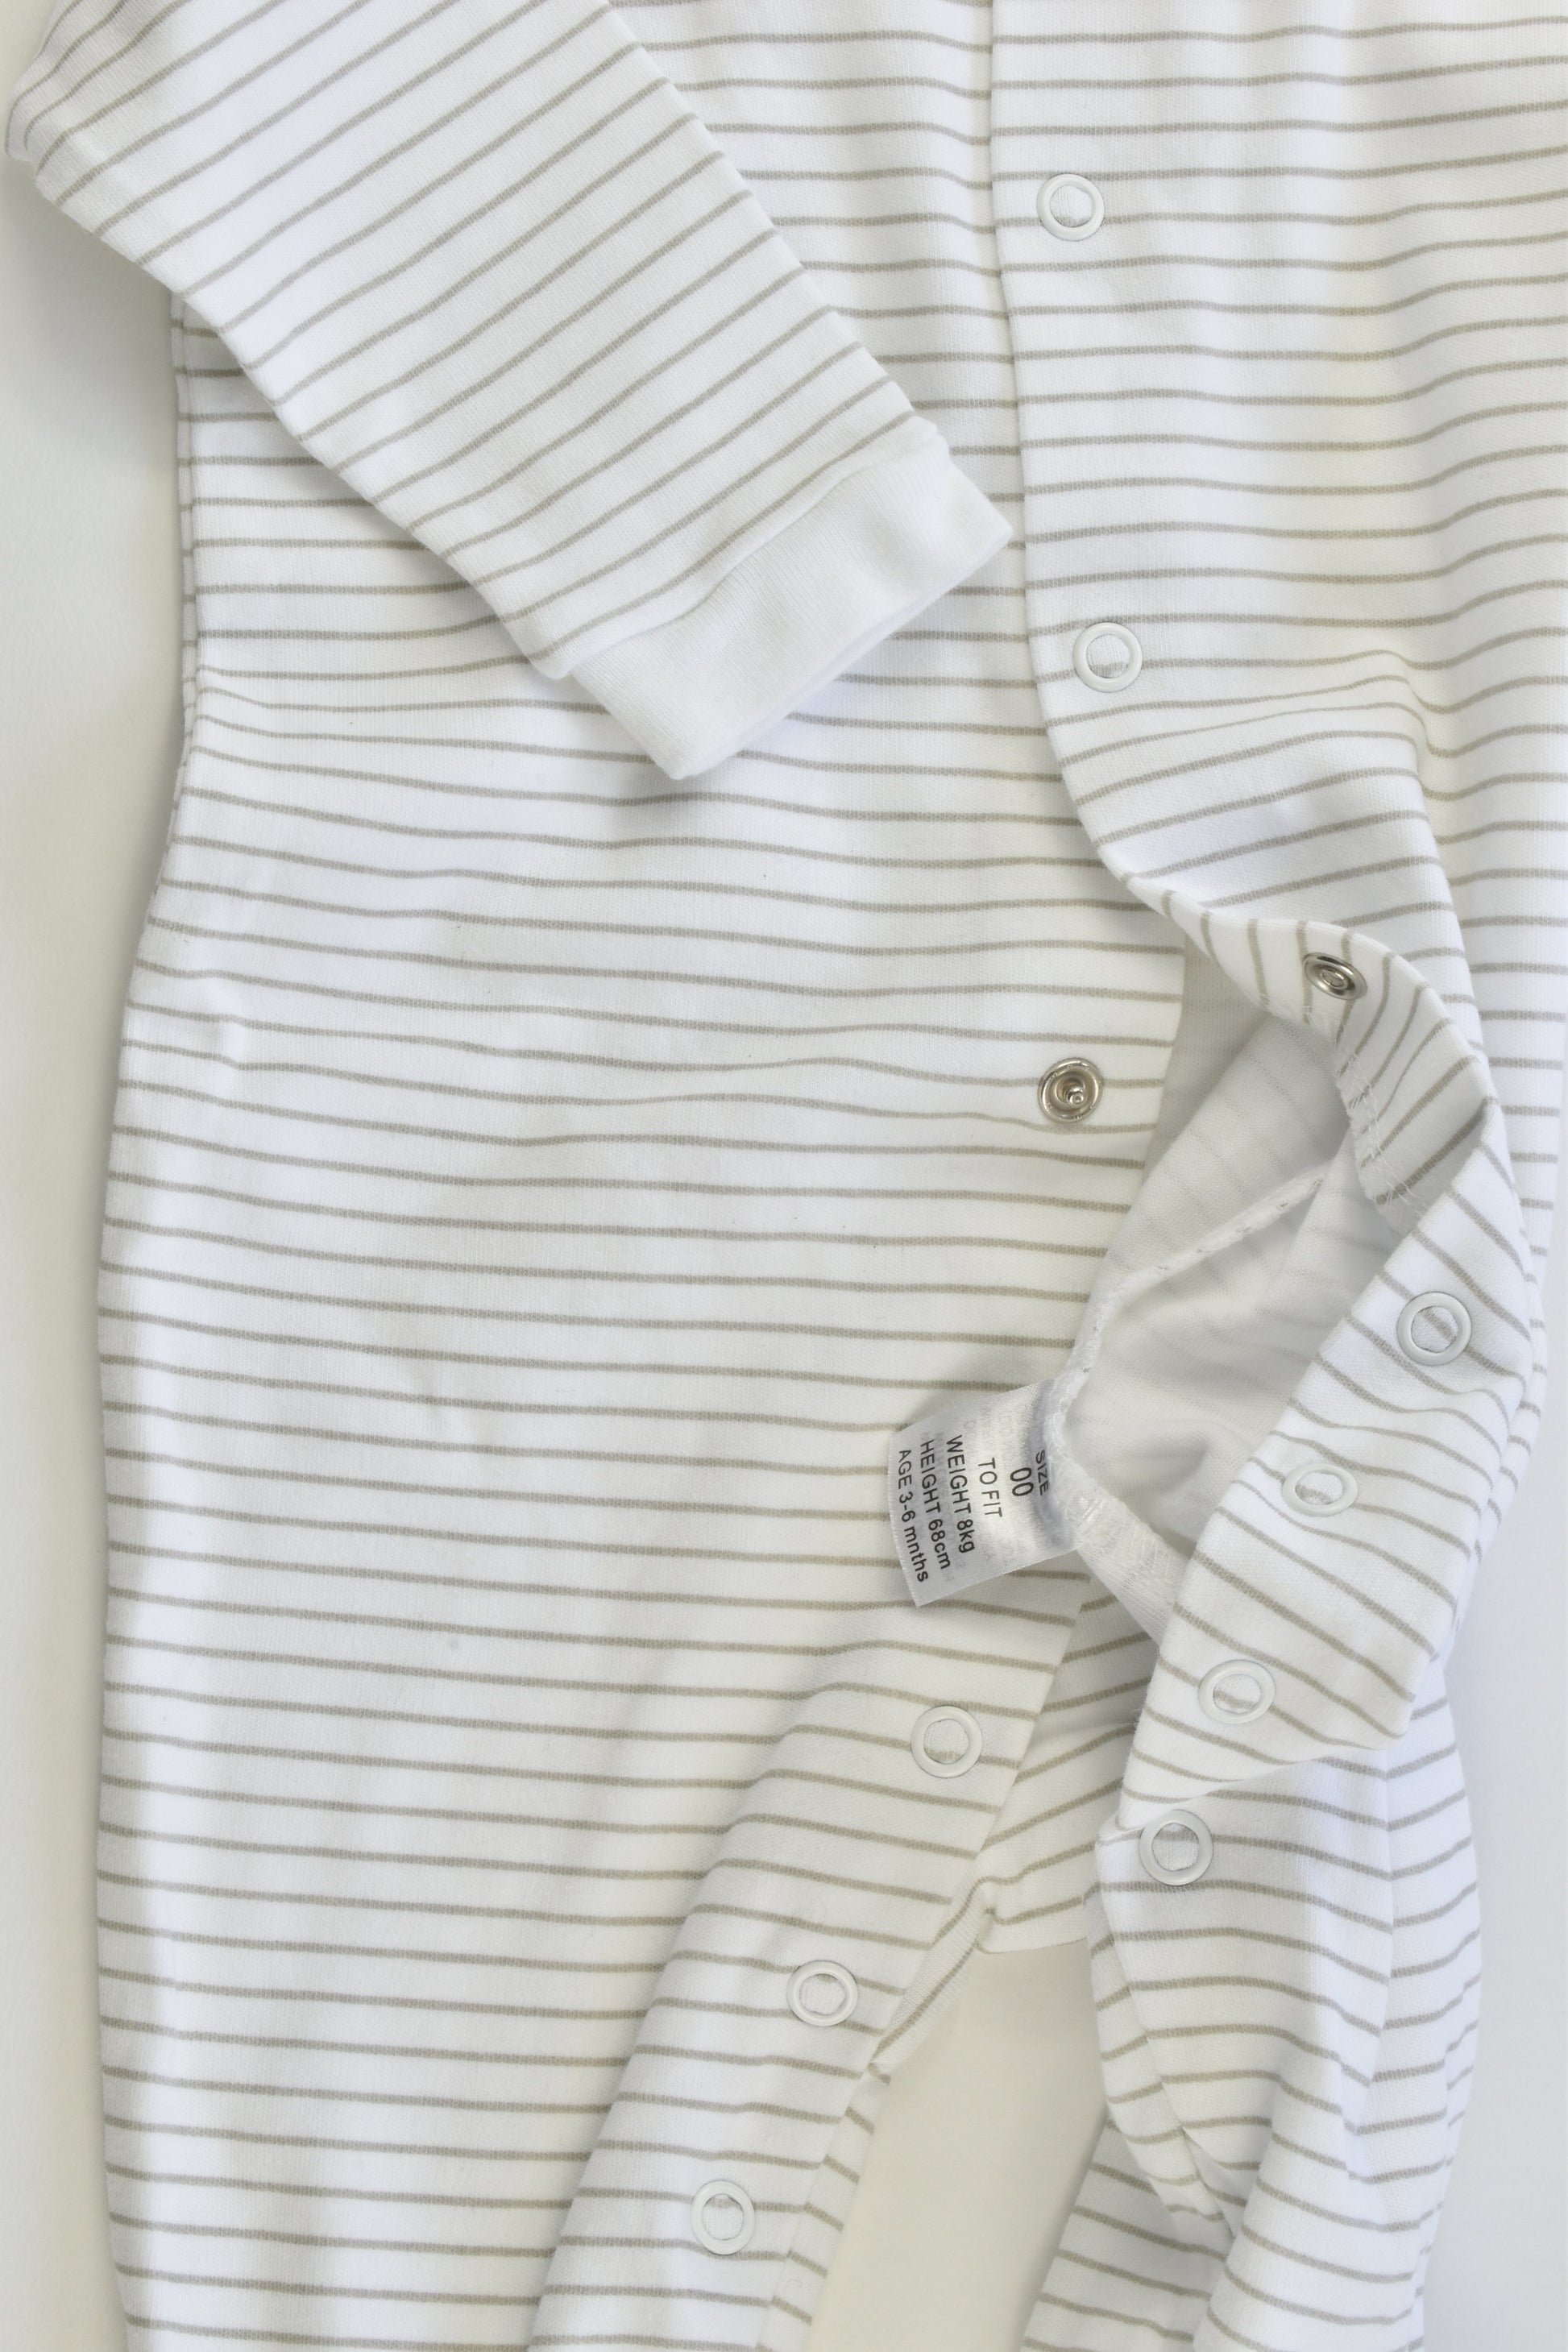 NEW Marquise Size 00 (3-6 months) Striped Footed Romper